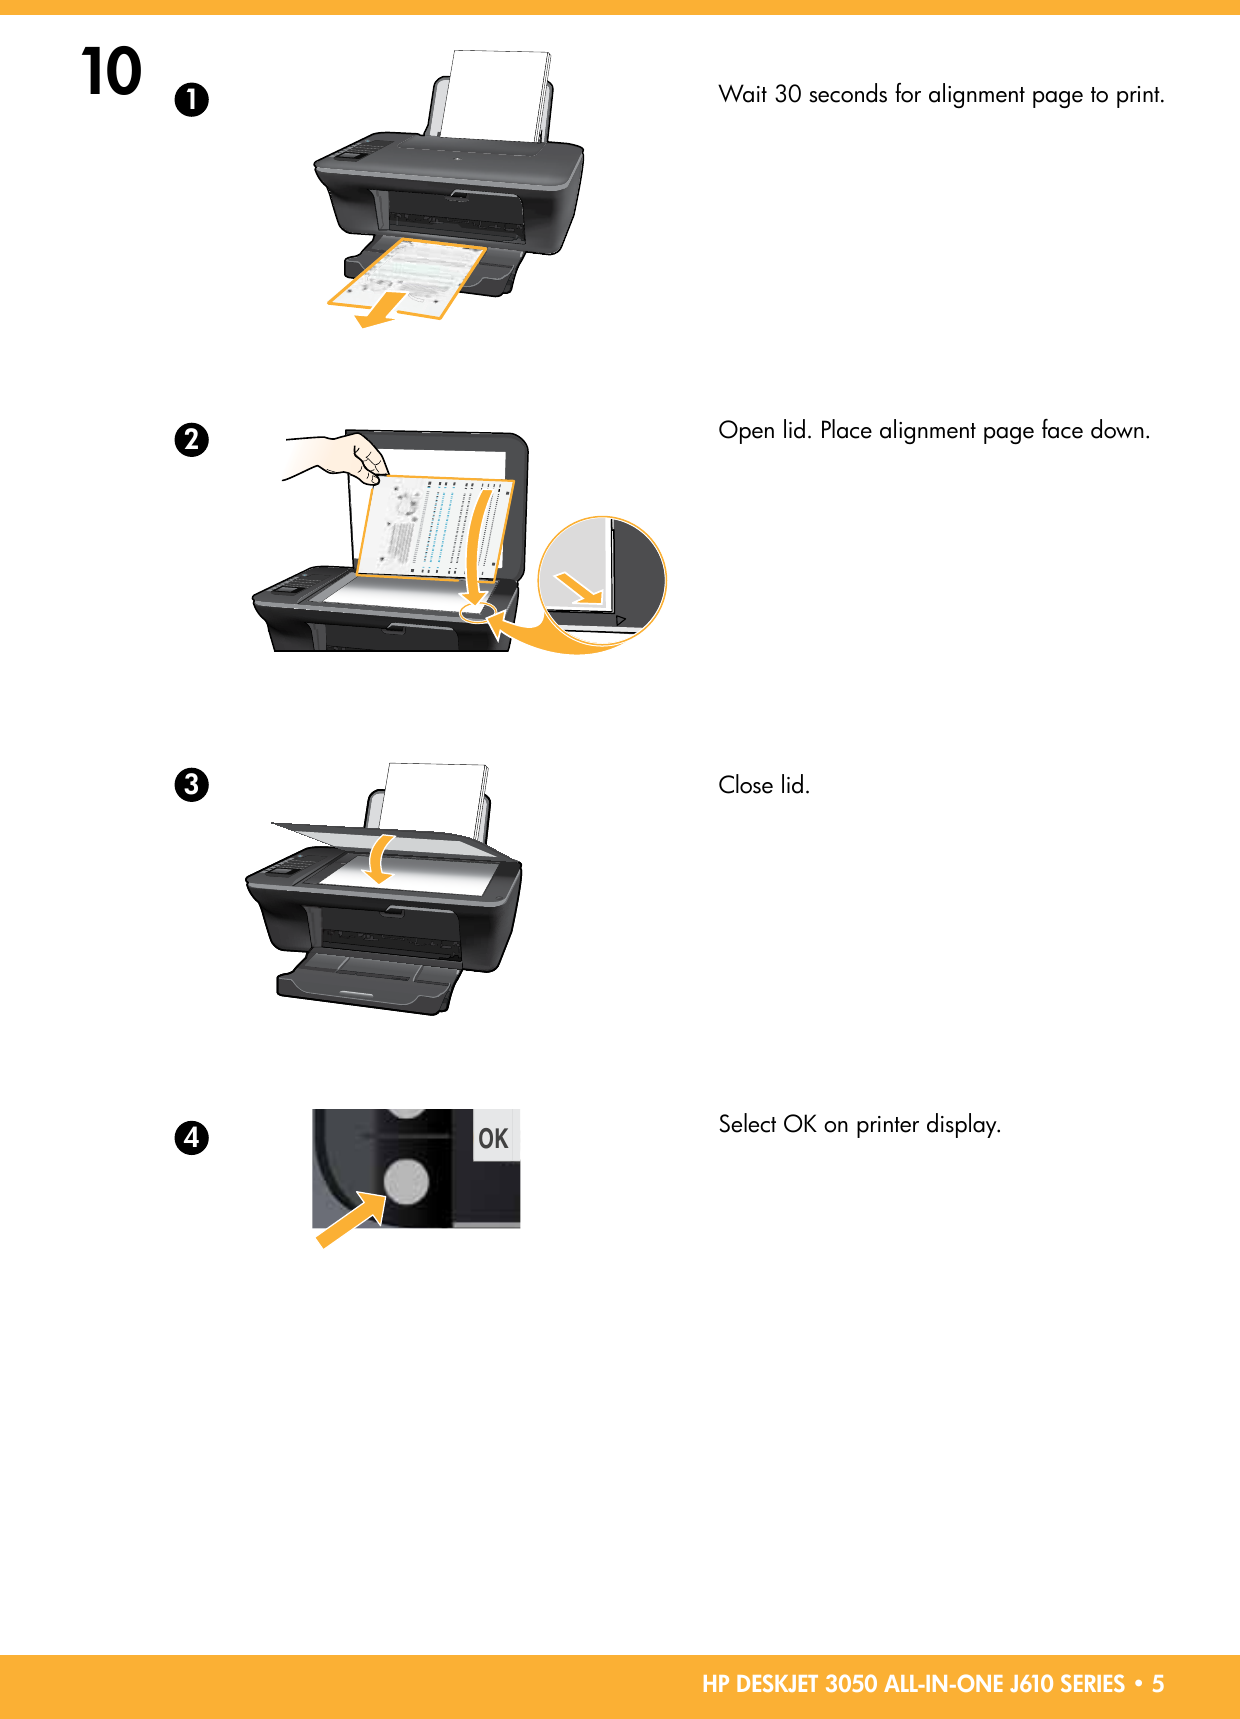 Page 5 of 8 - Hp Hp-Deskjet-3050-All-In-One-Printer-J610A-Setup-Guide-  Hp-deskjet-3050-all-in-one-printer-j610a-setup-guide